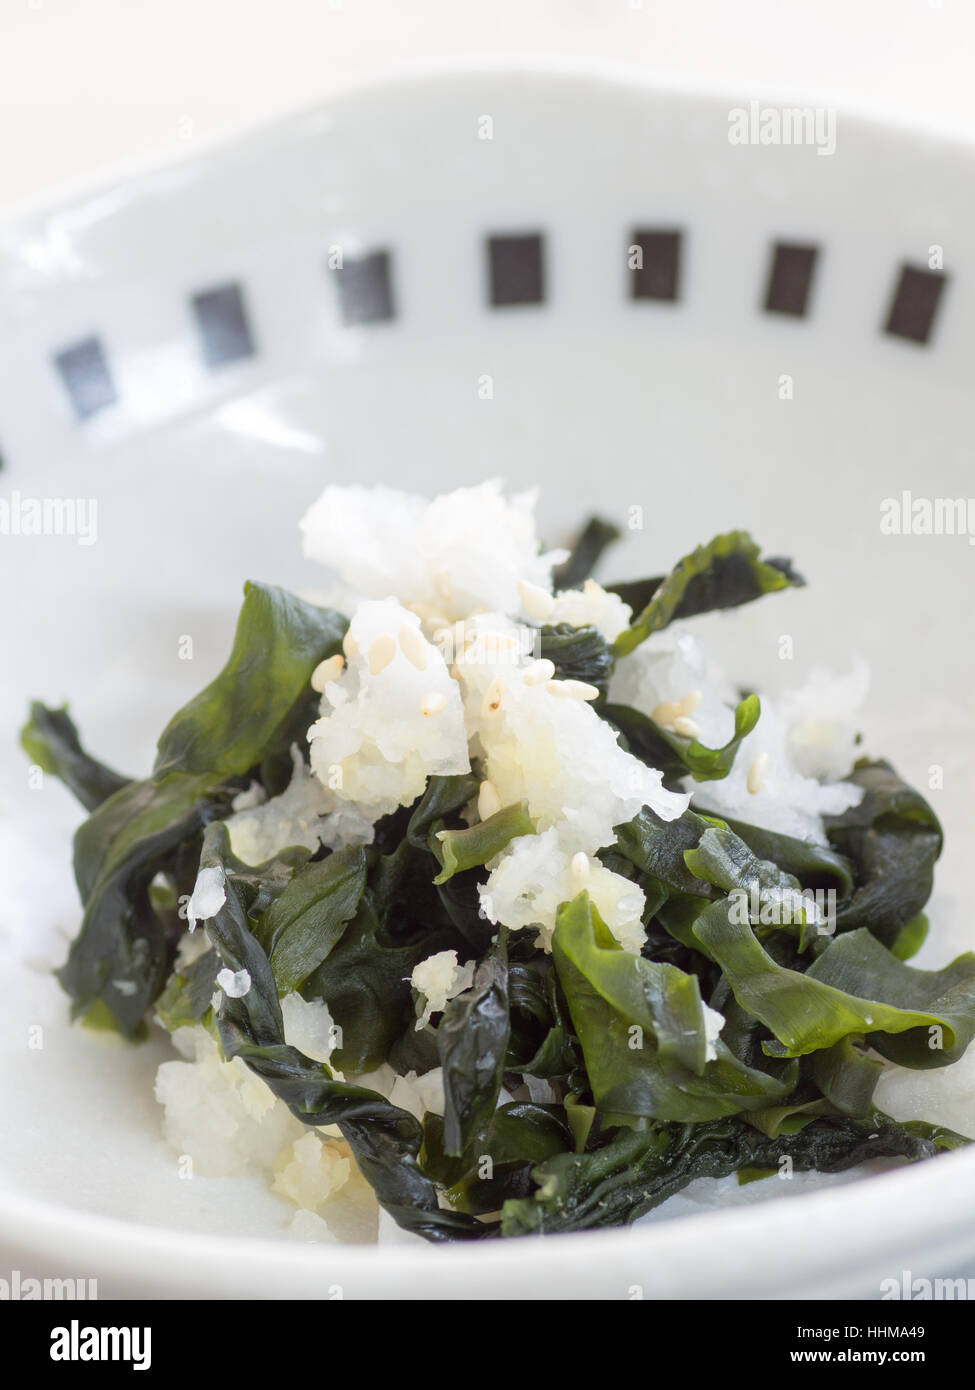 Japanese cuisine, sea weeds and grated Japanese daikon radish salad in the bowl Stock Photo